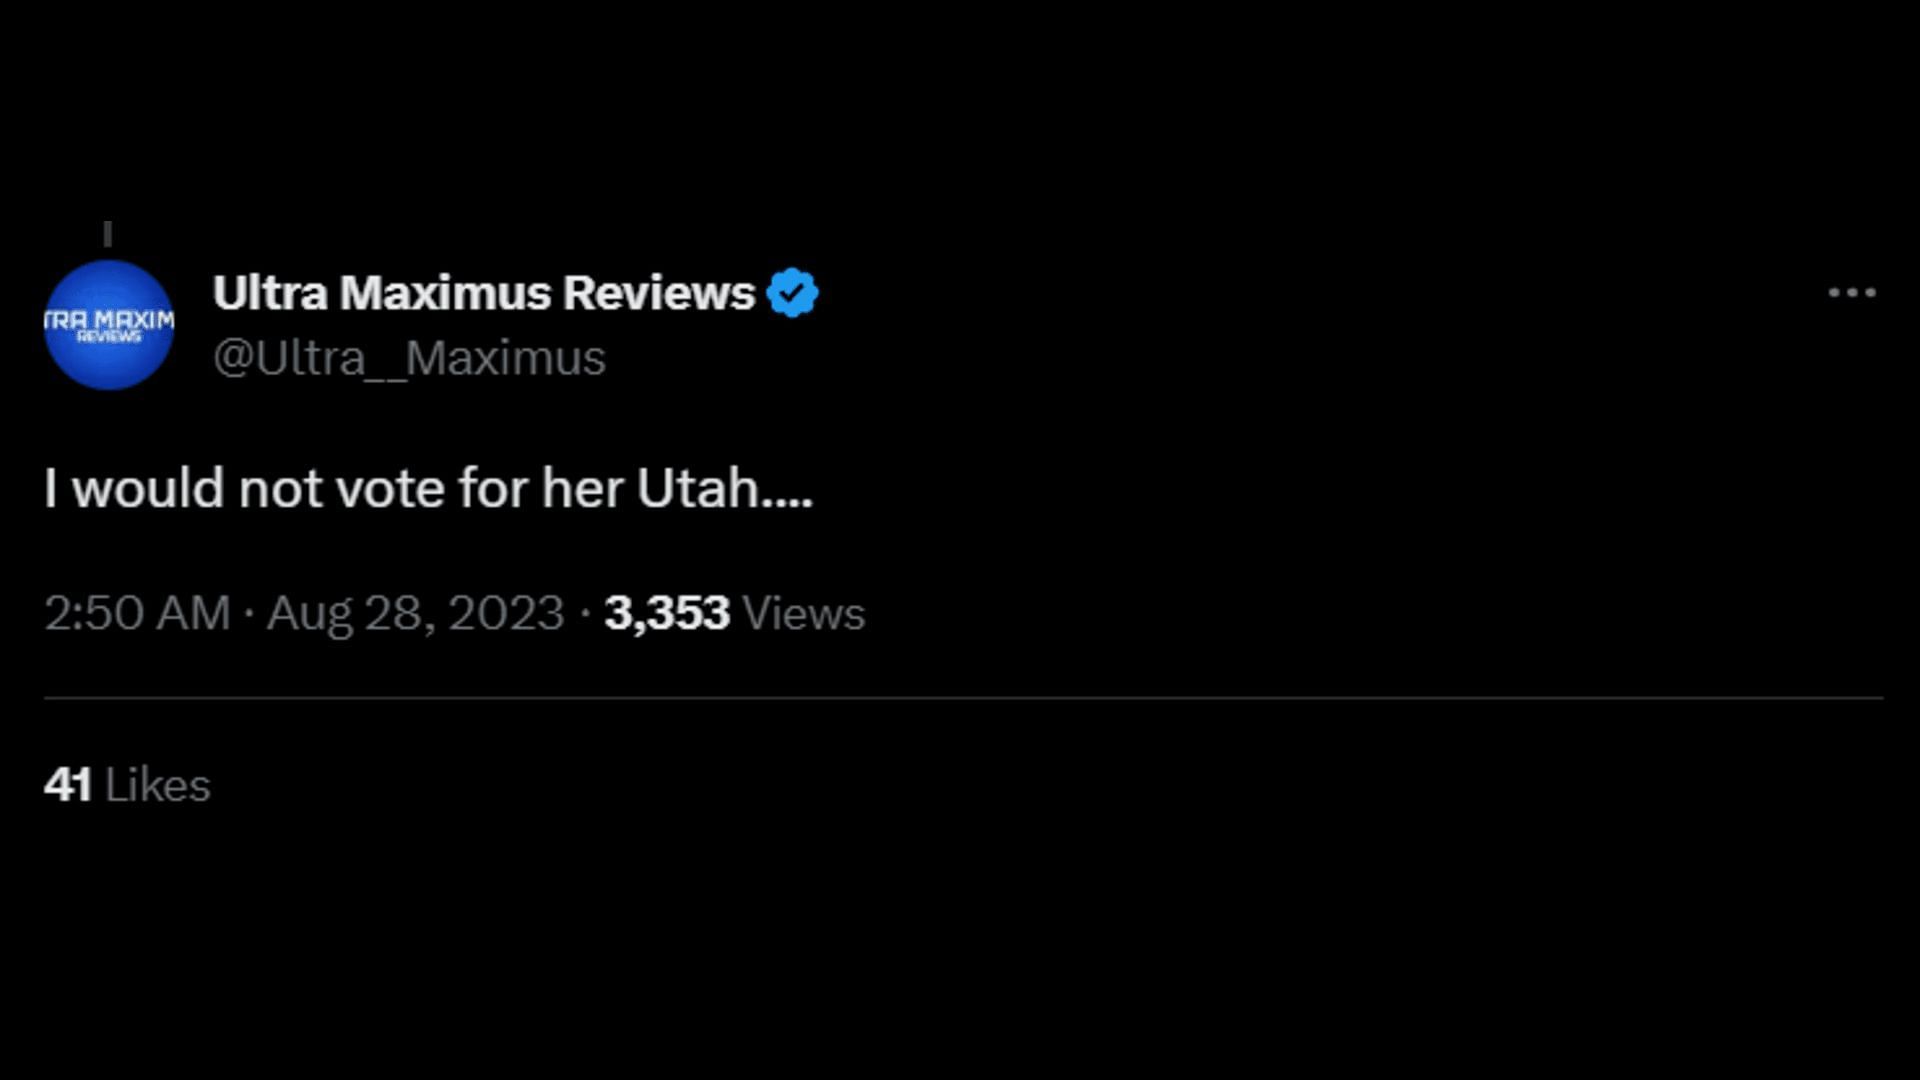 A tweet asks Utah citizens not to vote for Gray. (Image via X/Ultra Maximus Reviews)